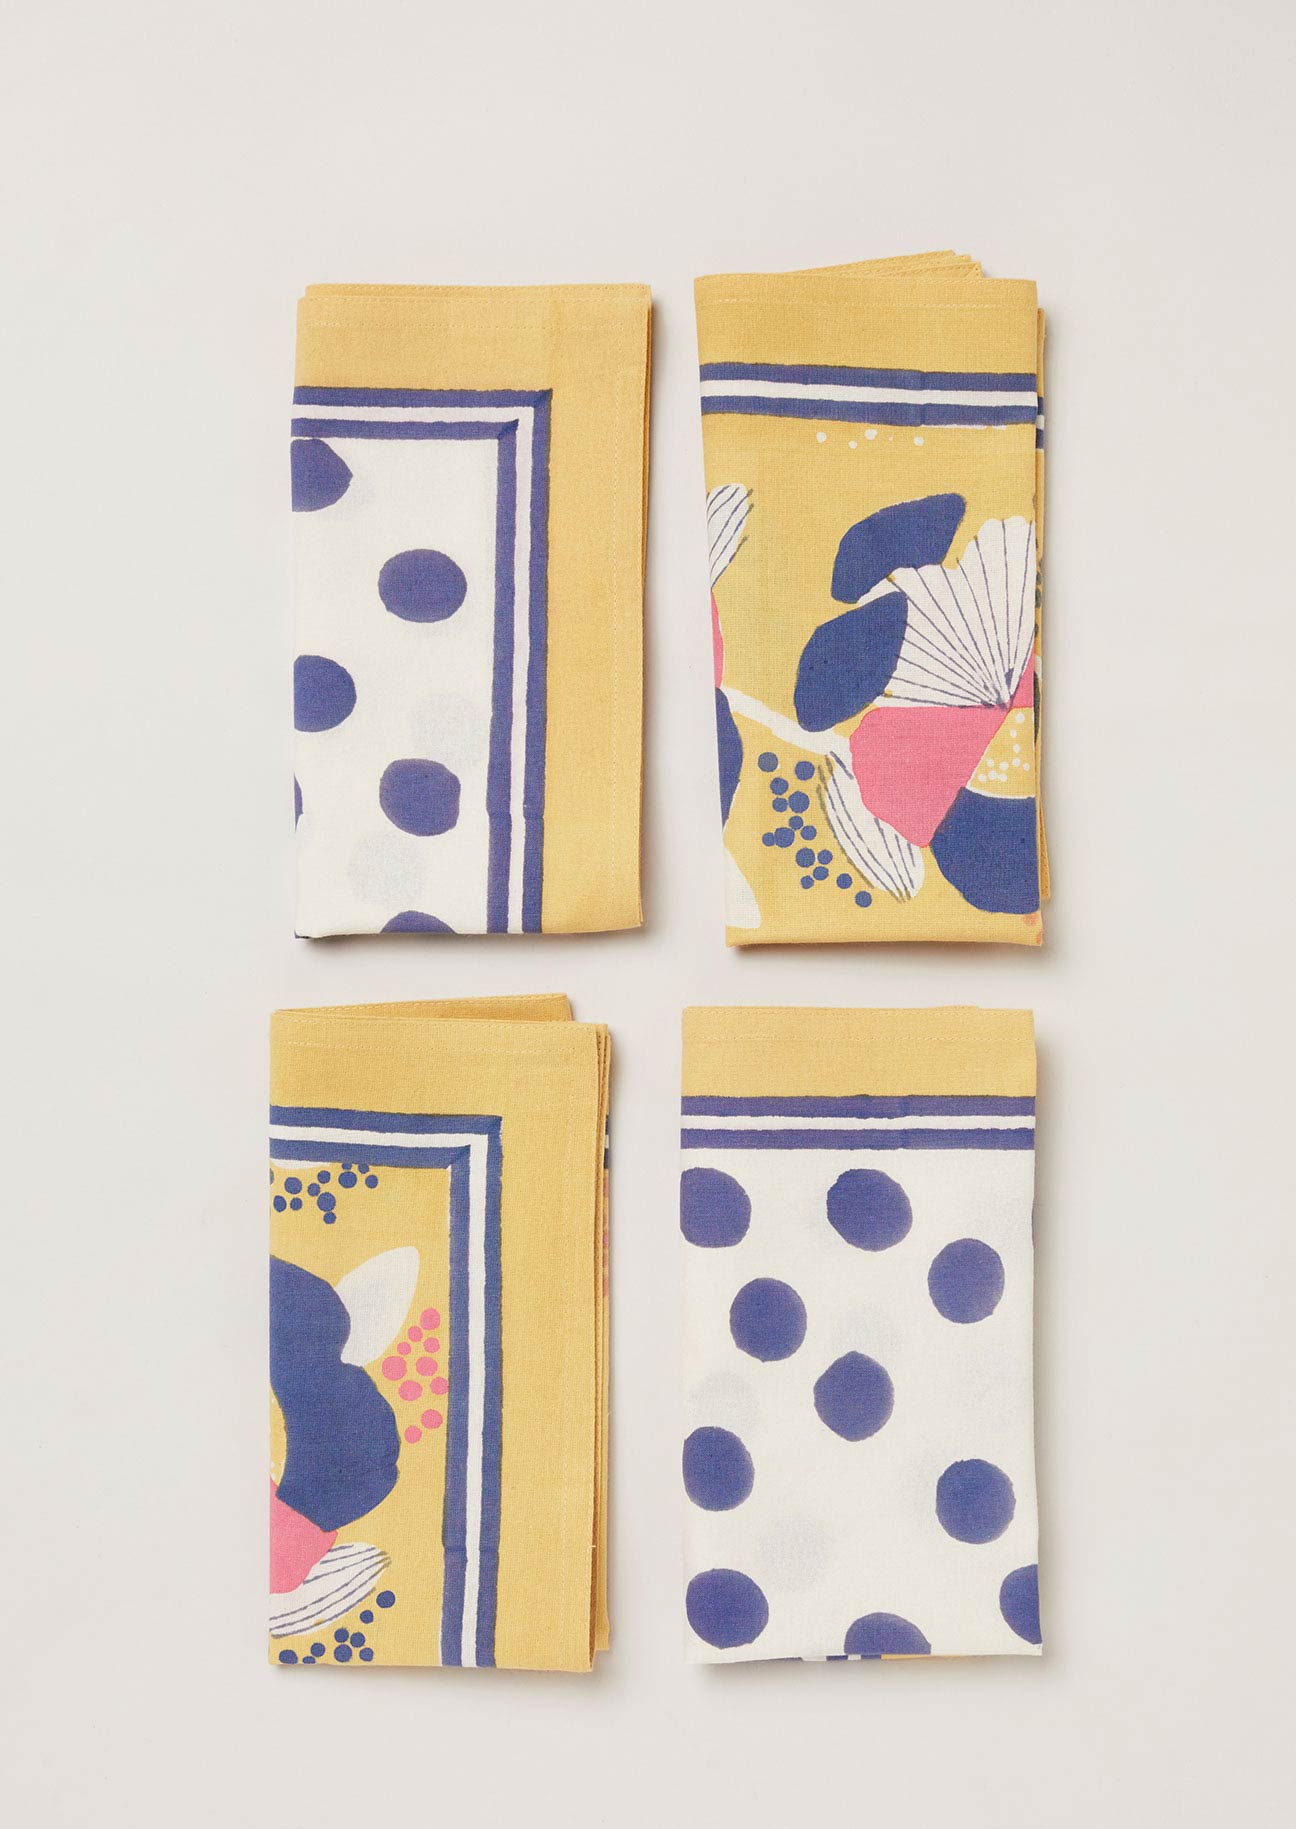 Set of 4 block printed napkins in two contrasting prints, a navy dot and  yellow and navy floral design.